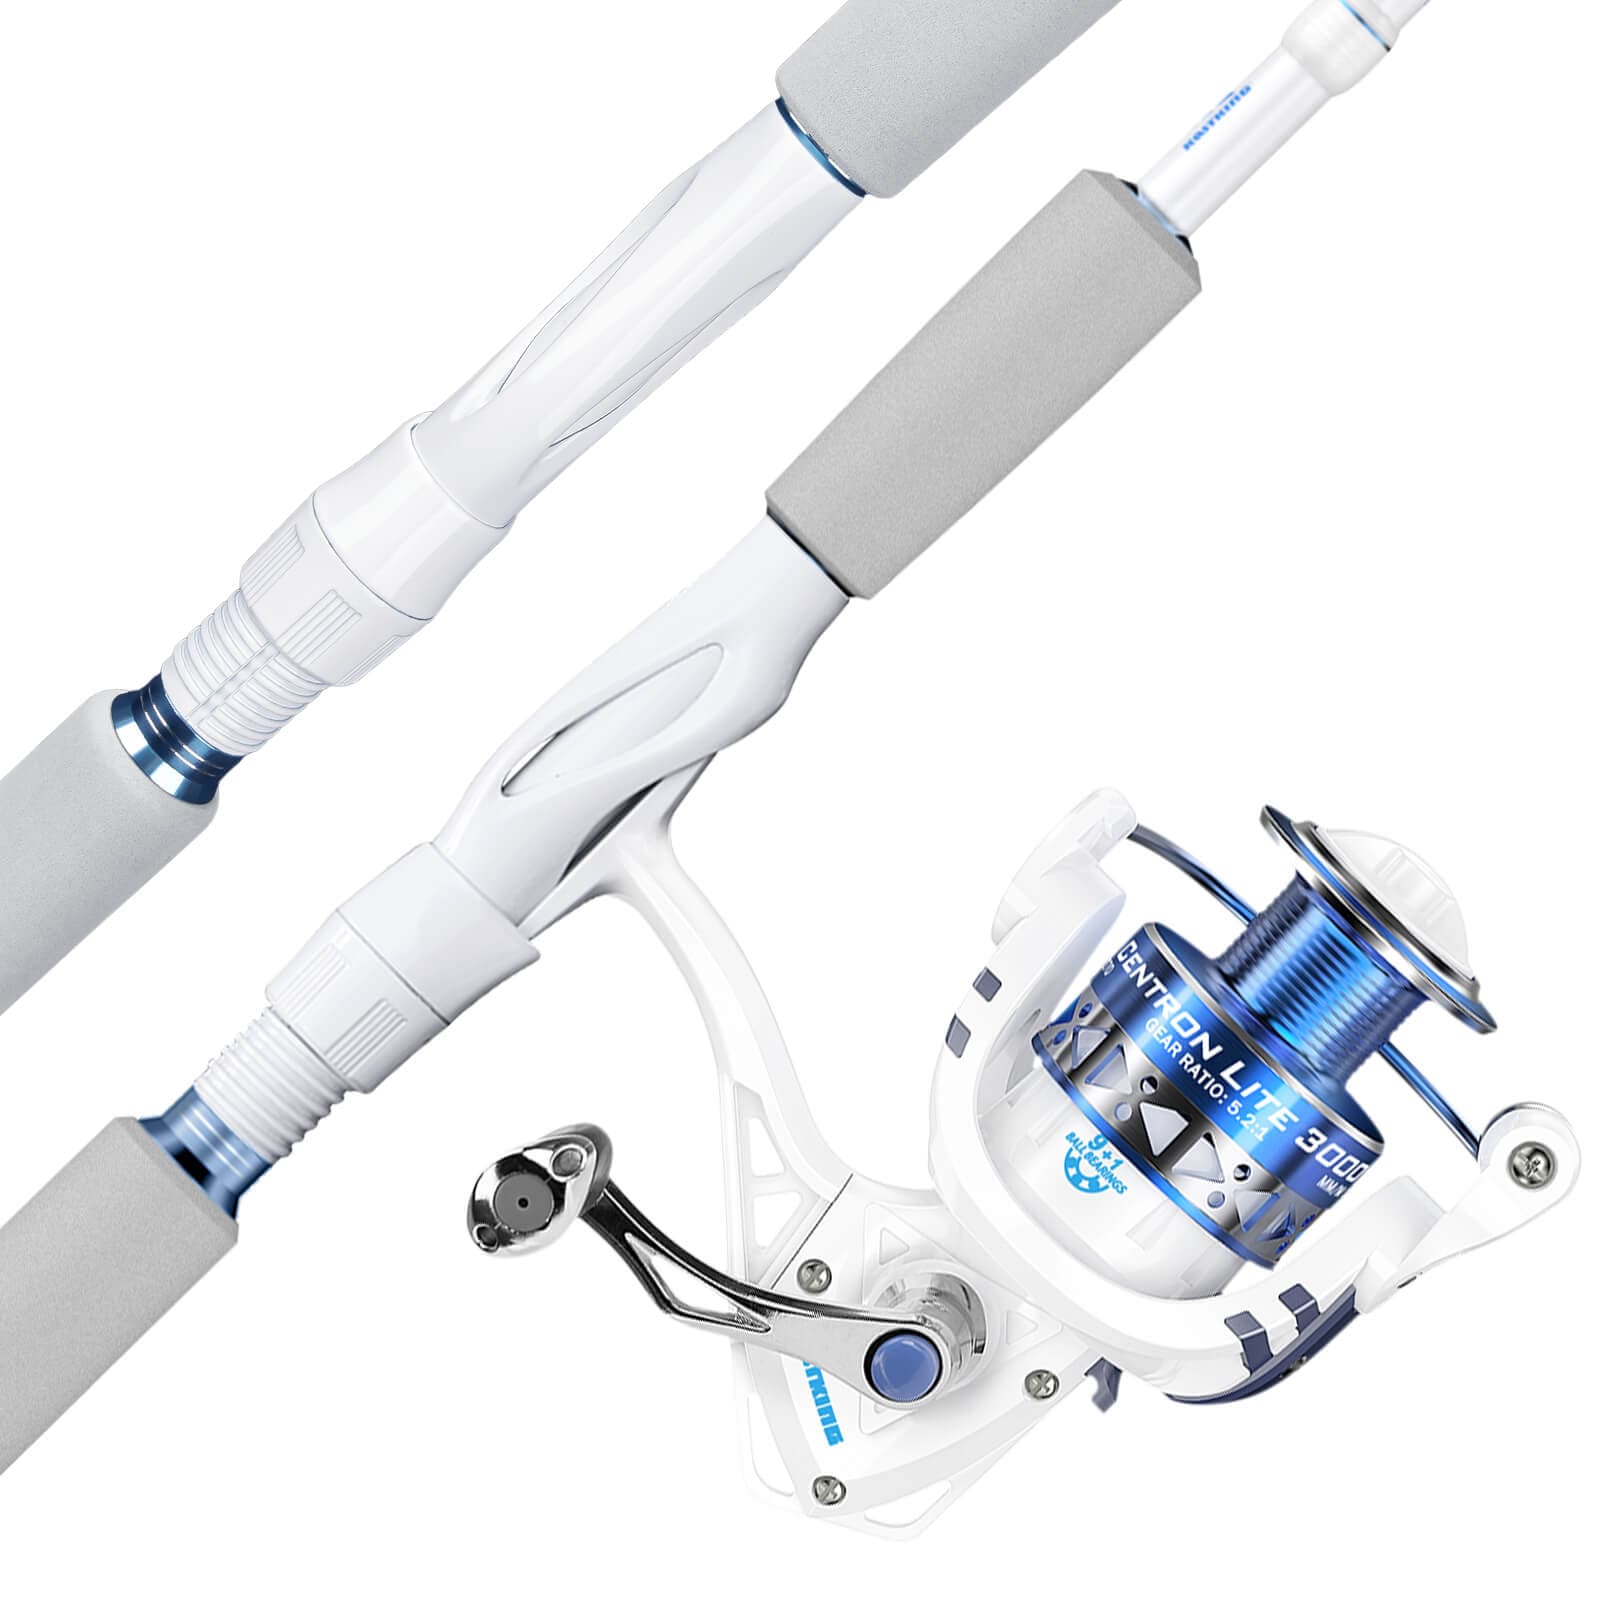 KastKing Centron Lite Spinning Rod and Reel Combo